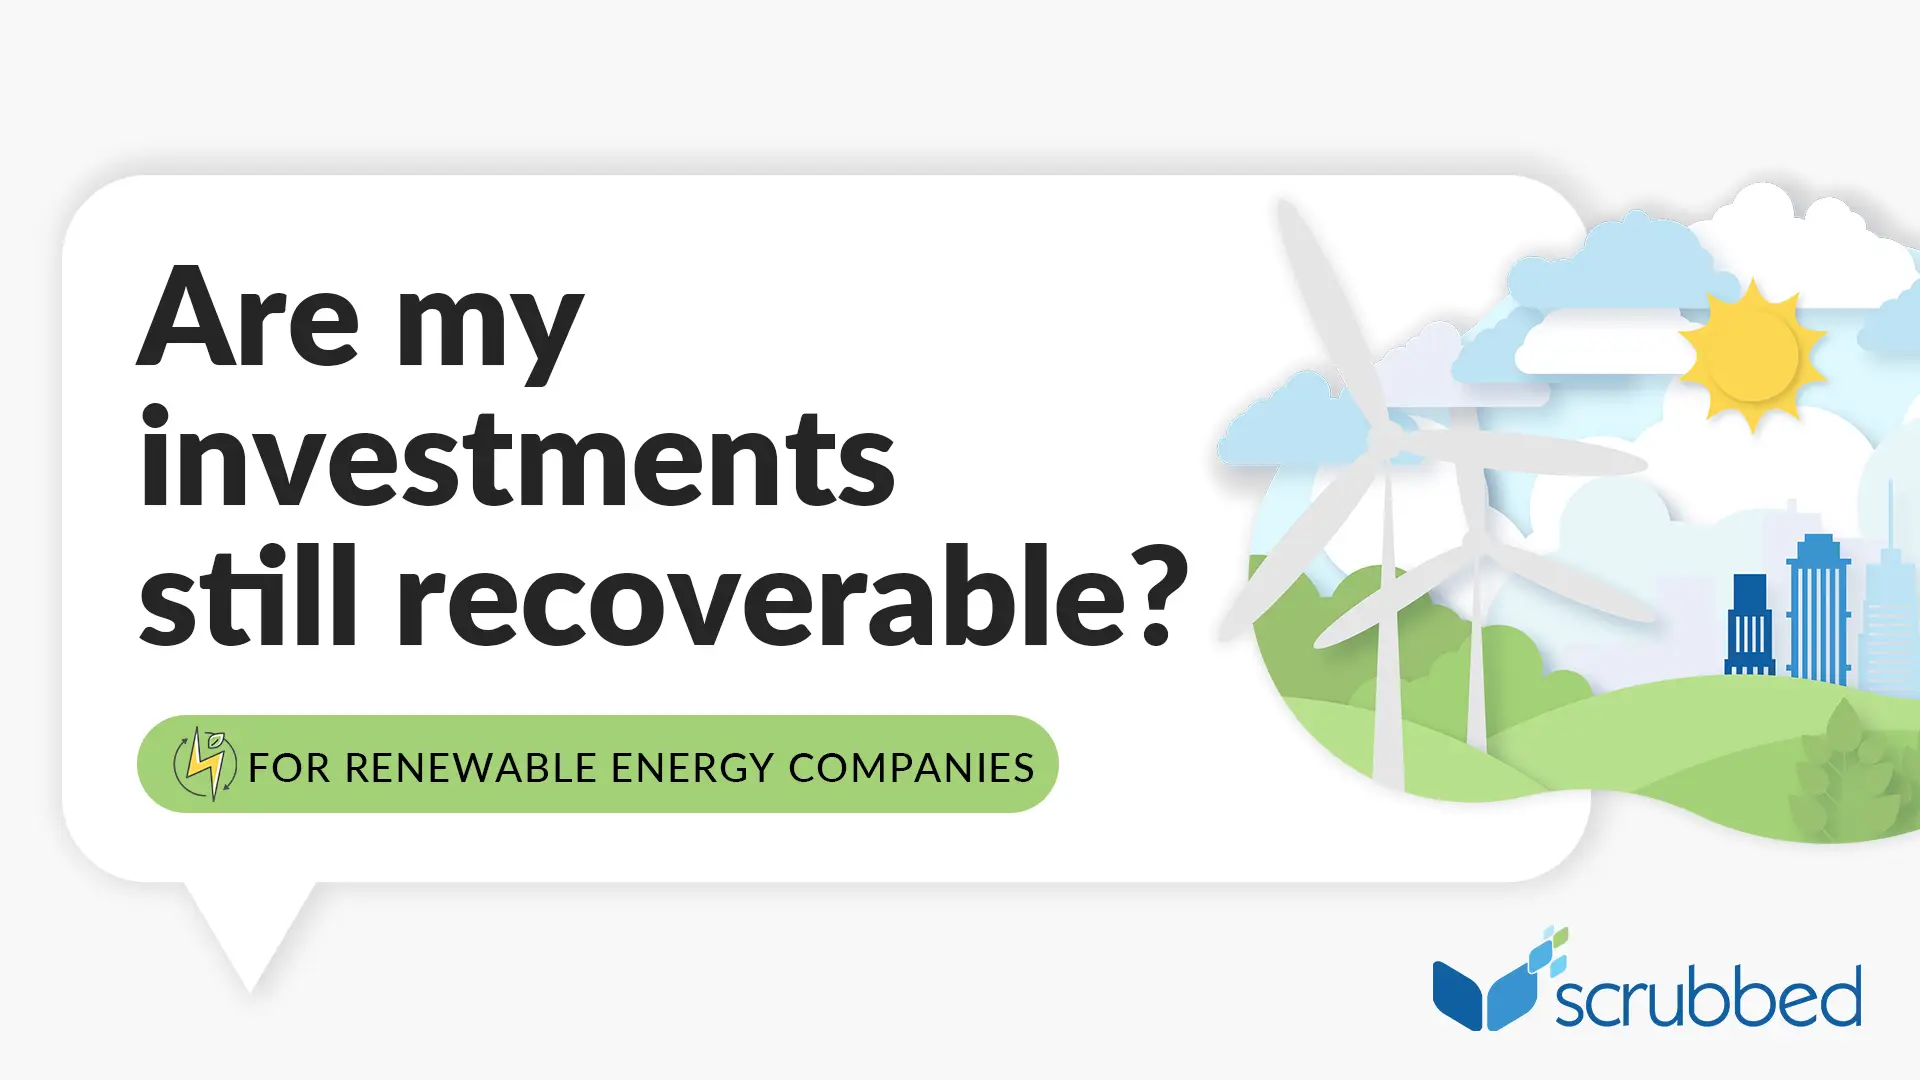 How do accounting standards address asset impairment for renewable energy companies?